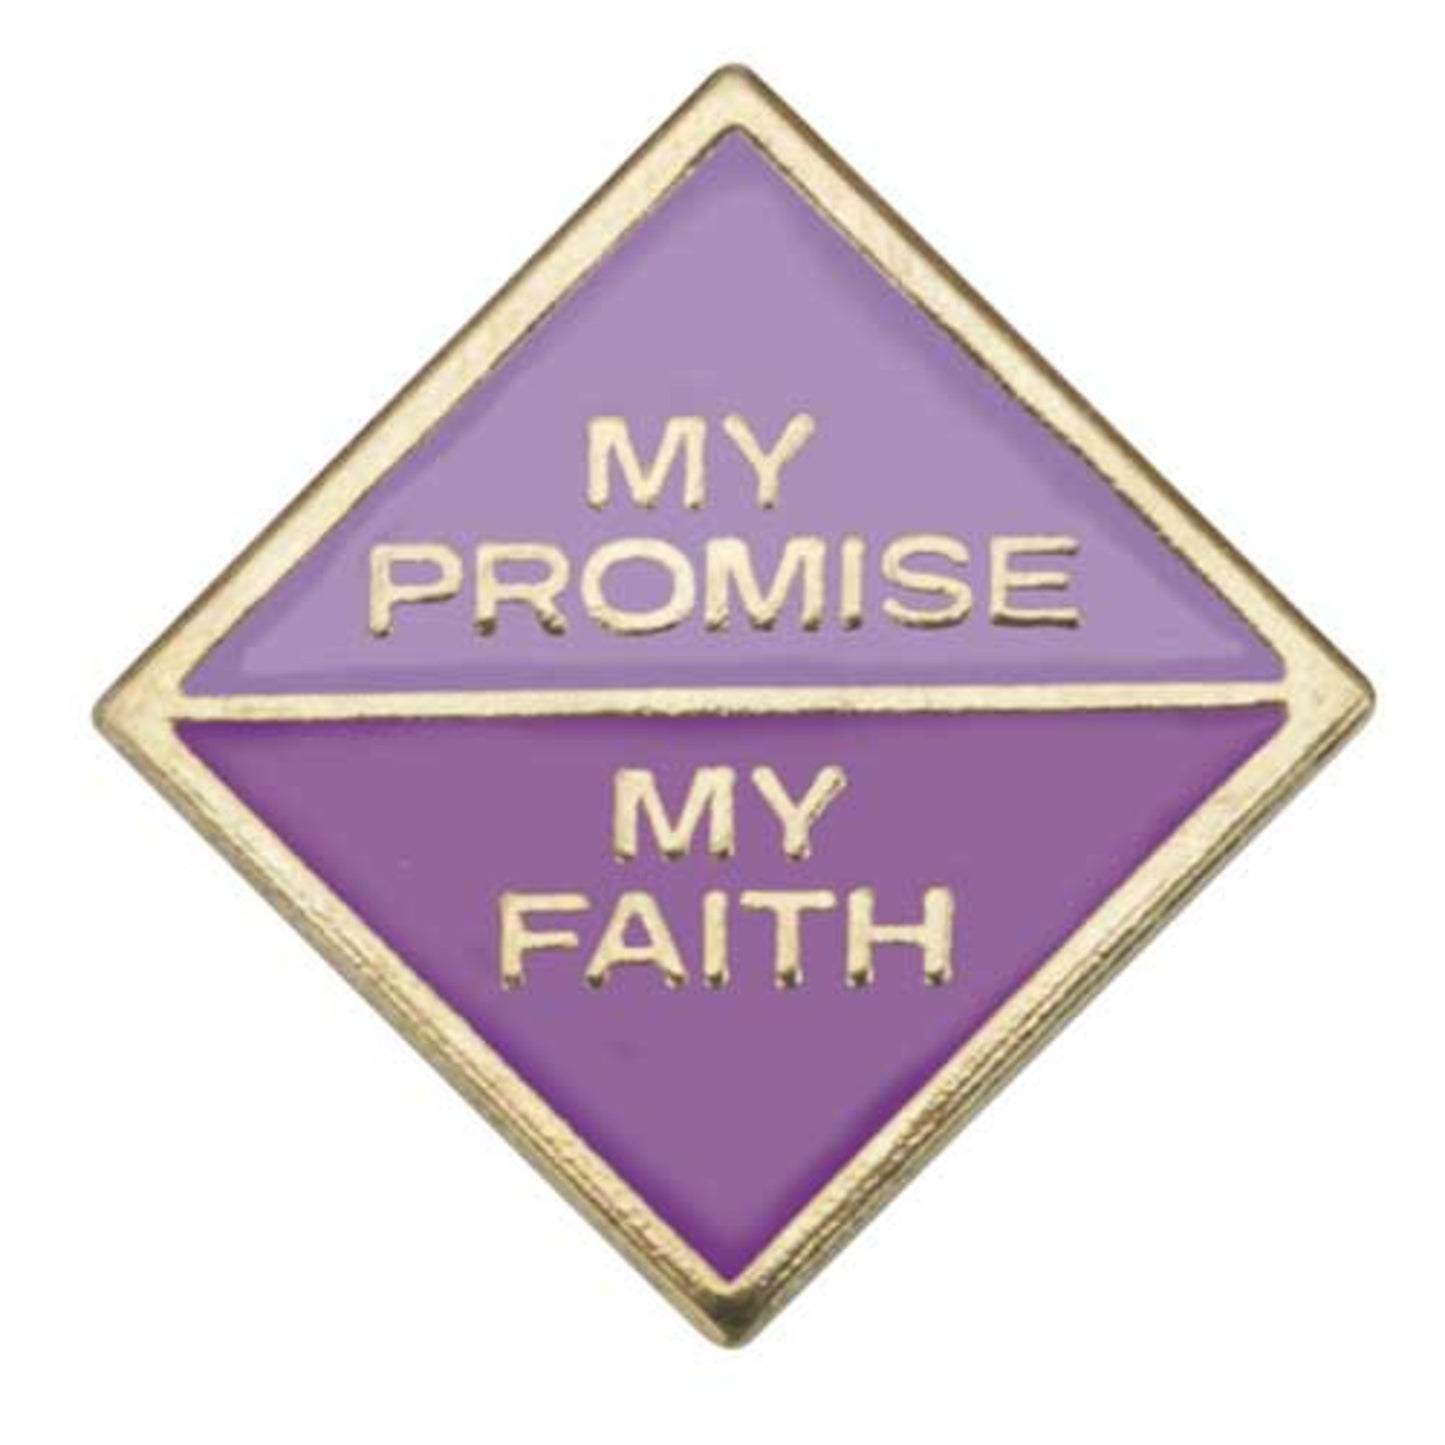 Girl Scouts Junior My Promise, My Faith Pin - Year 1 - Basics Clothing Store